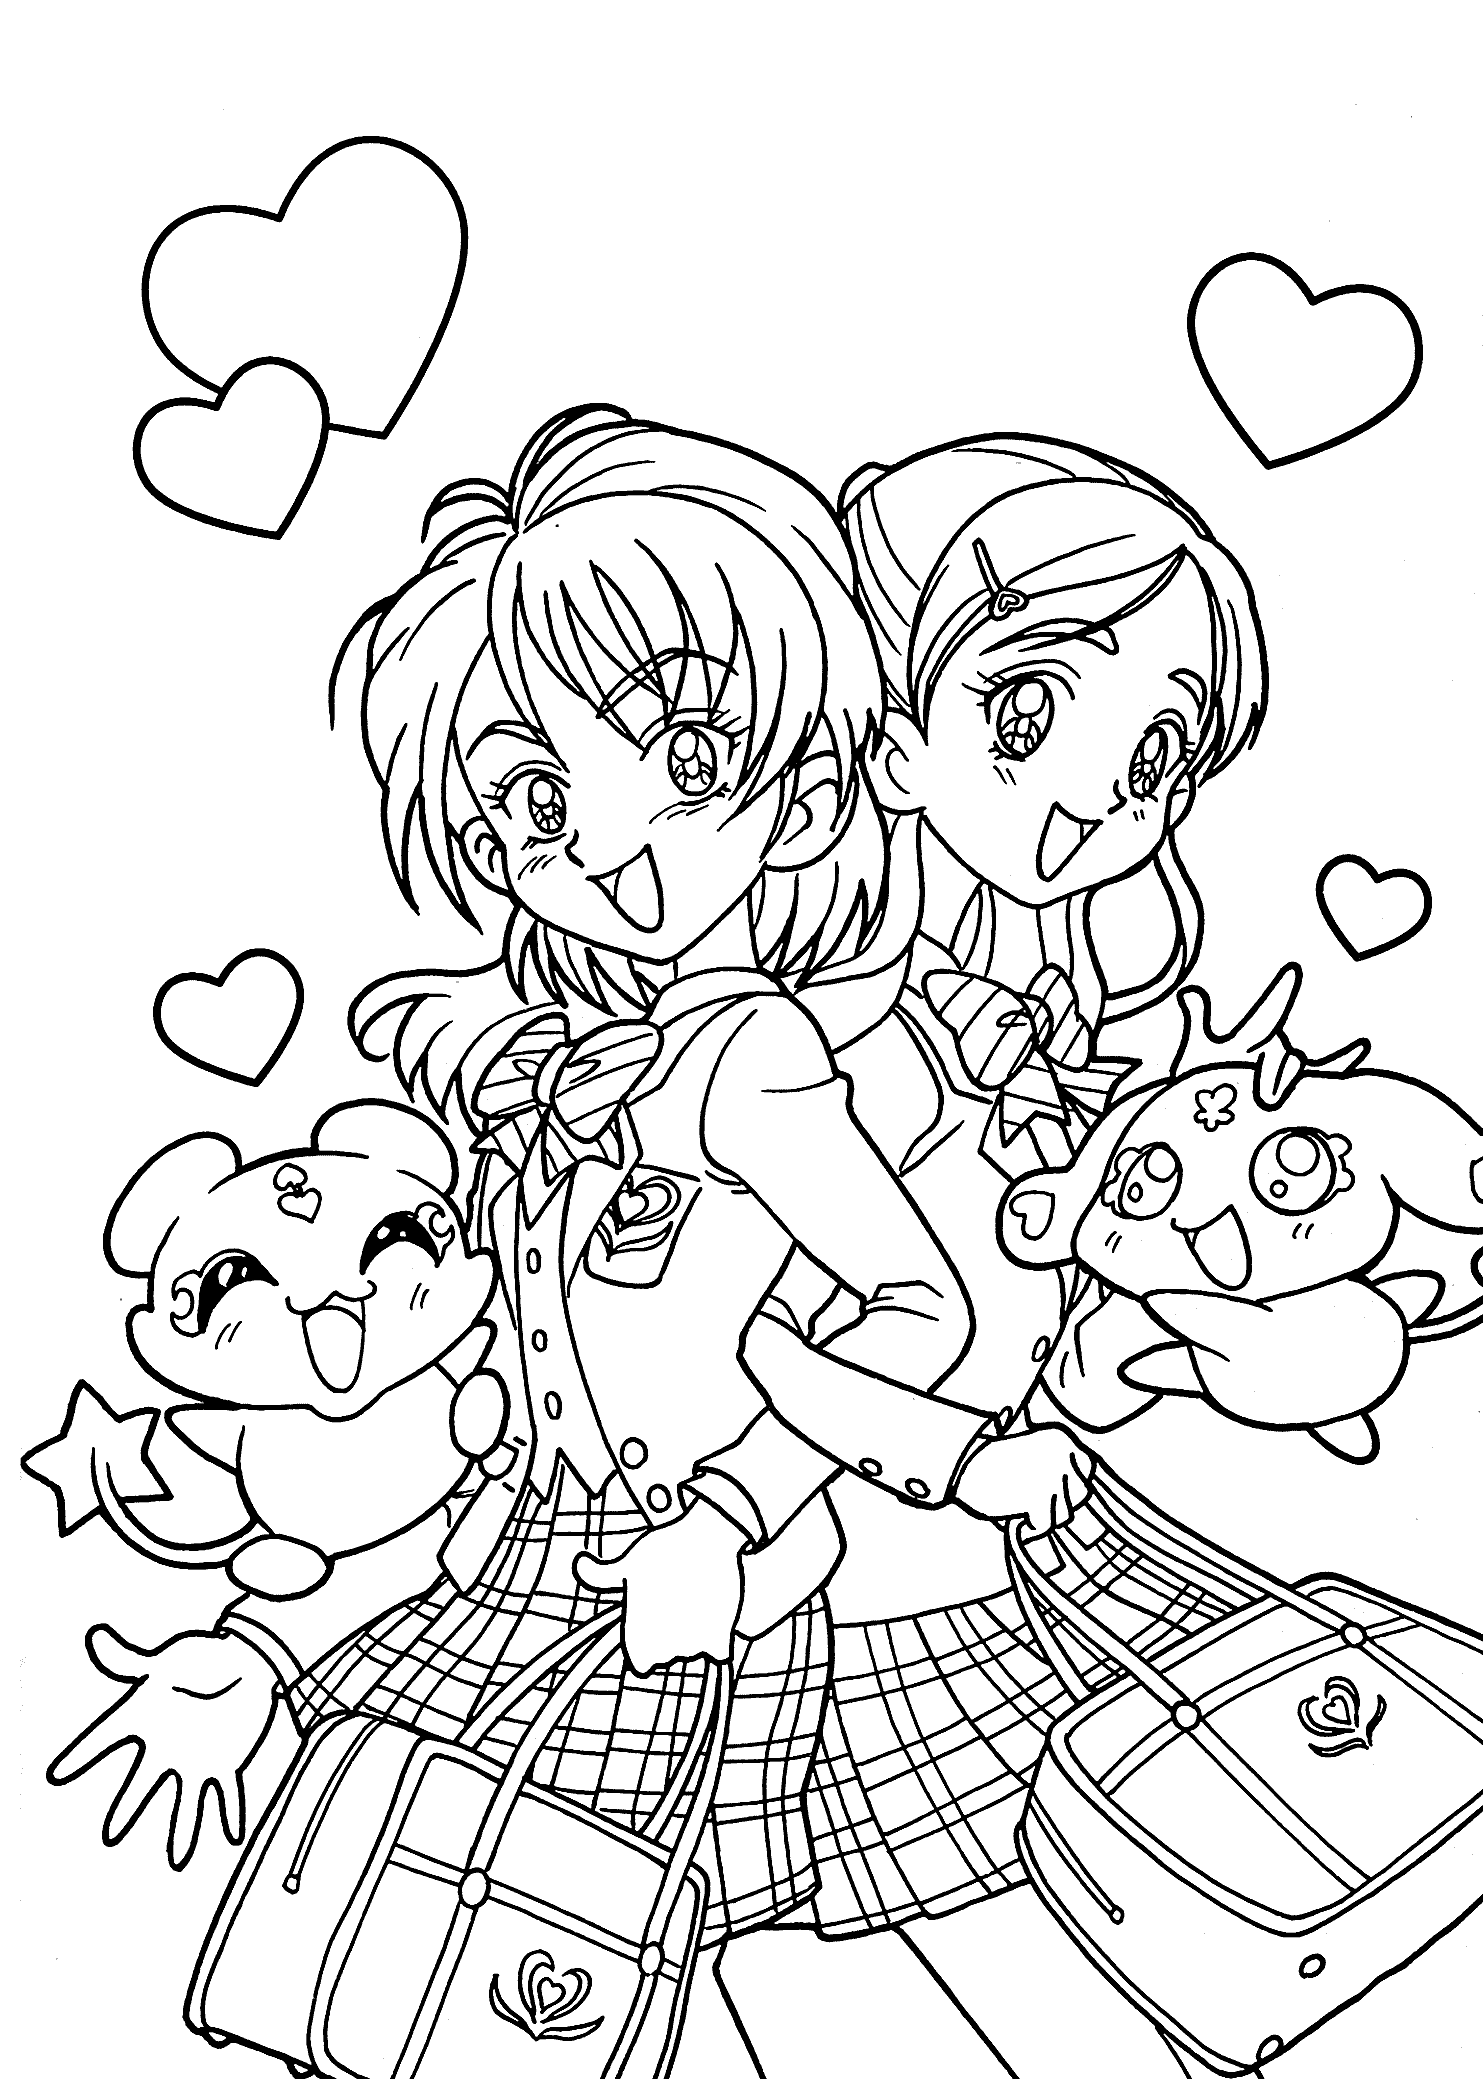 manga coloring pages school girl Coloring22free - Coloring22Free.com